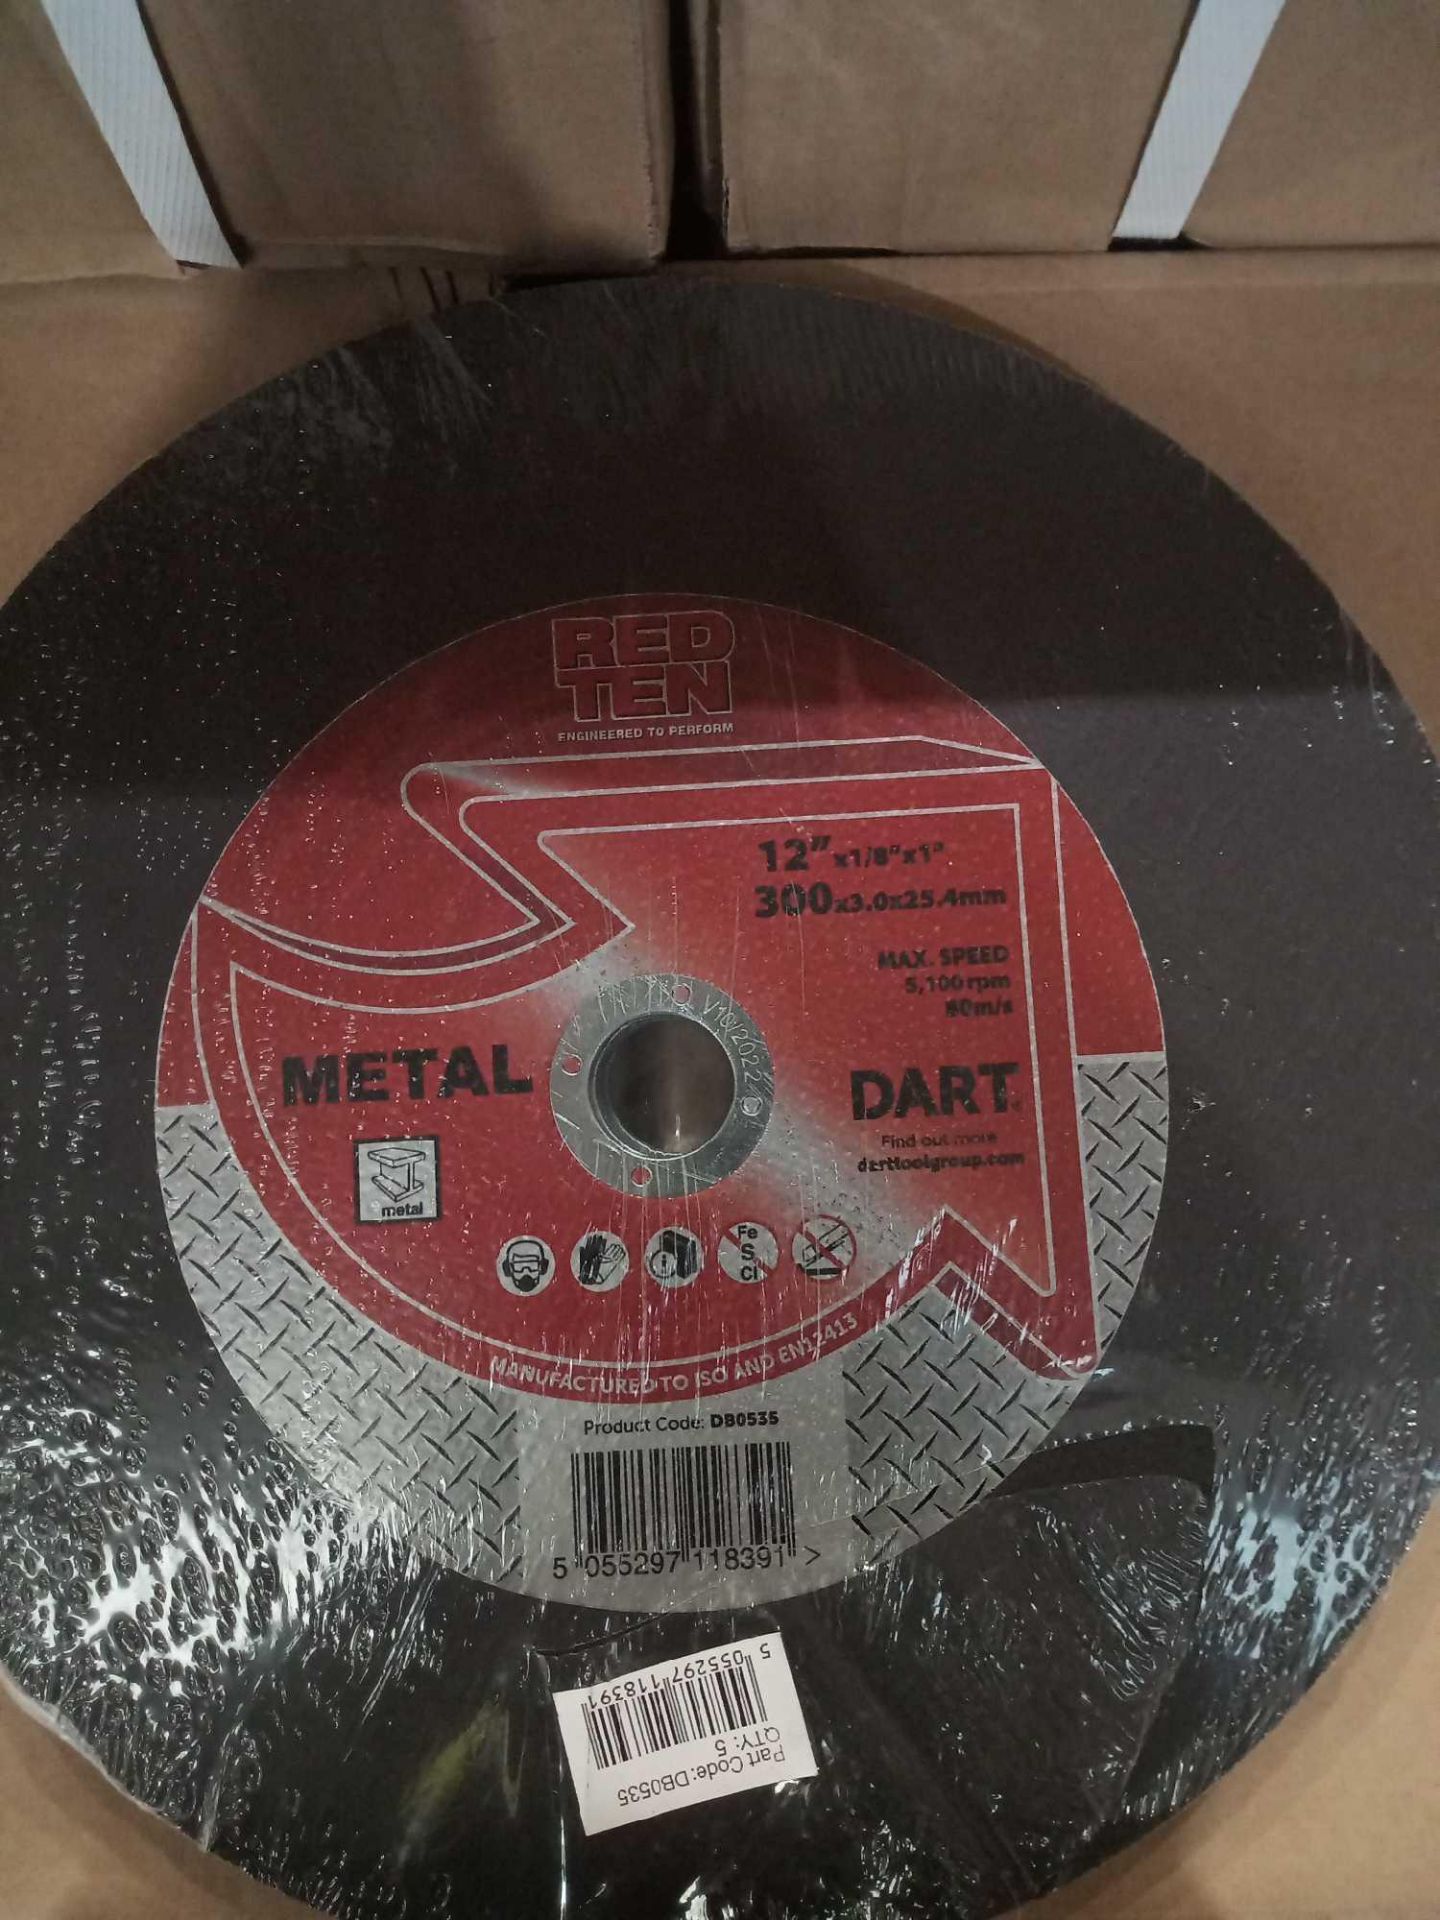 RRP £150 Box To Contain 25 Brand New Dart Metal Db0535 Red Ten Abrasive Disks - Image 2 of 3